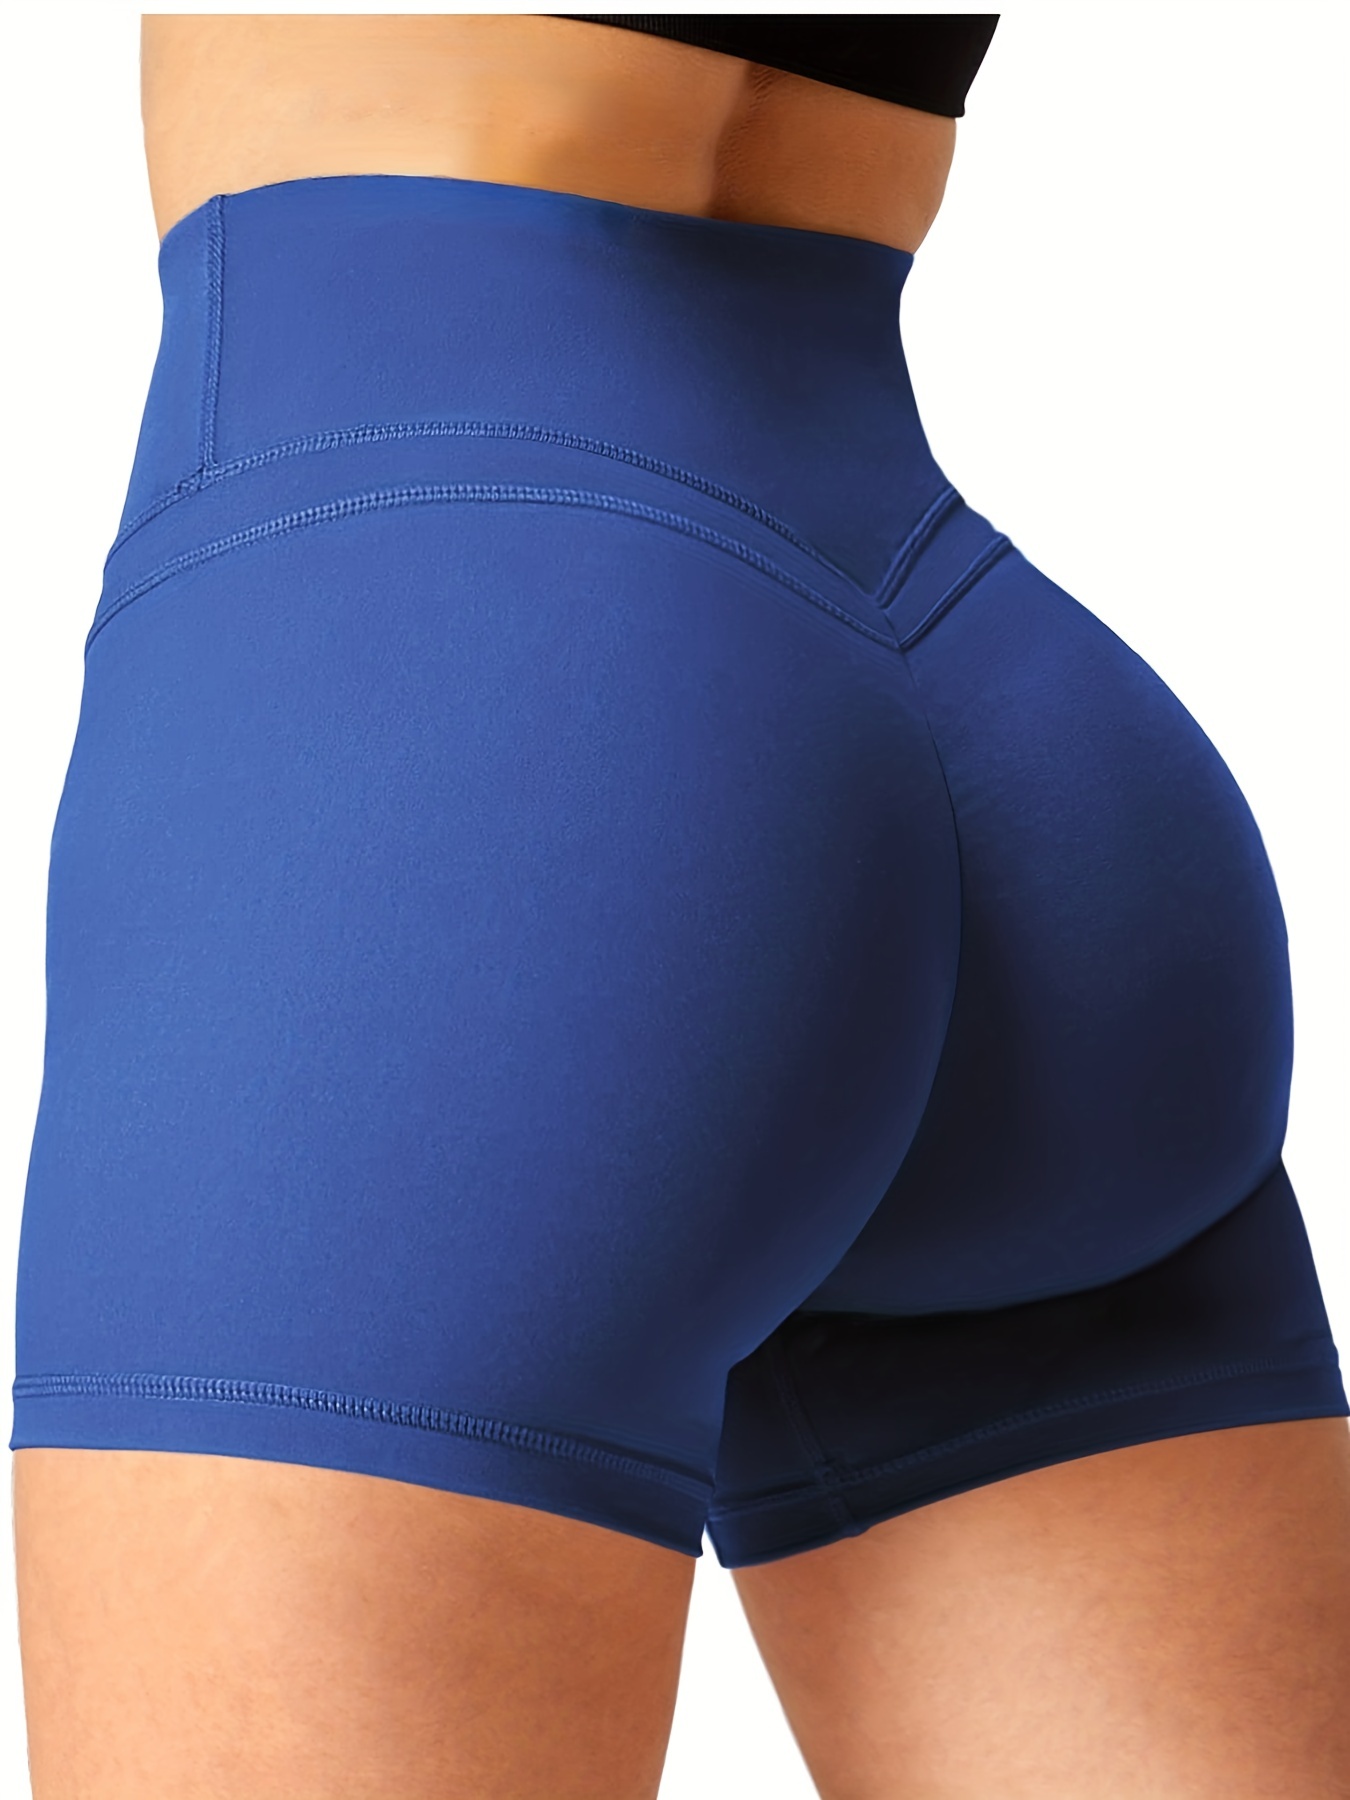  Workout Shorts Womens - Buttery Soft High Waisted Biker  Spandex Booty Volleyball Gym Shorts For Summer Yoga Dance Navy Blue XS